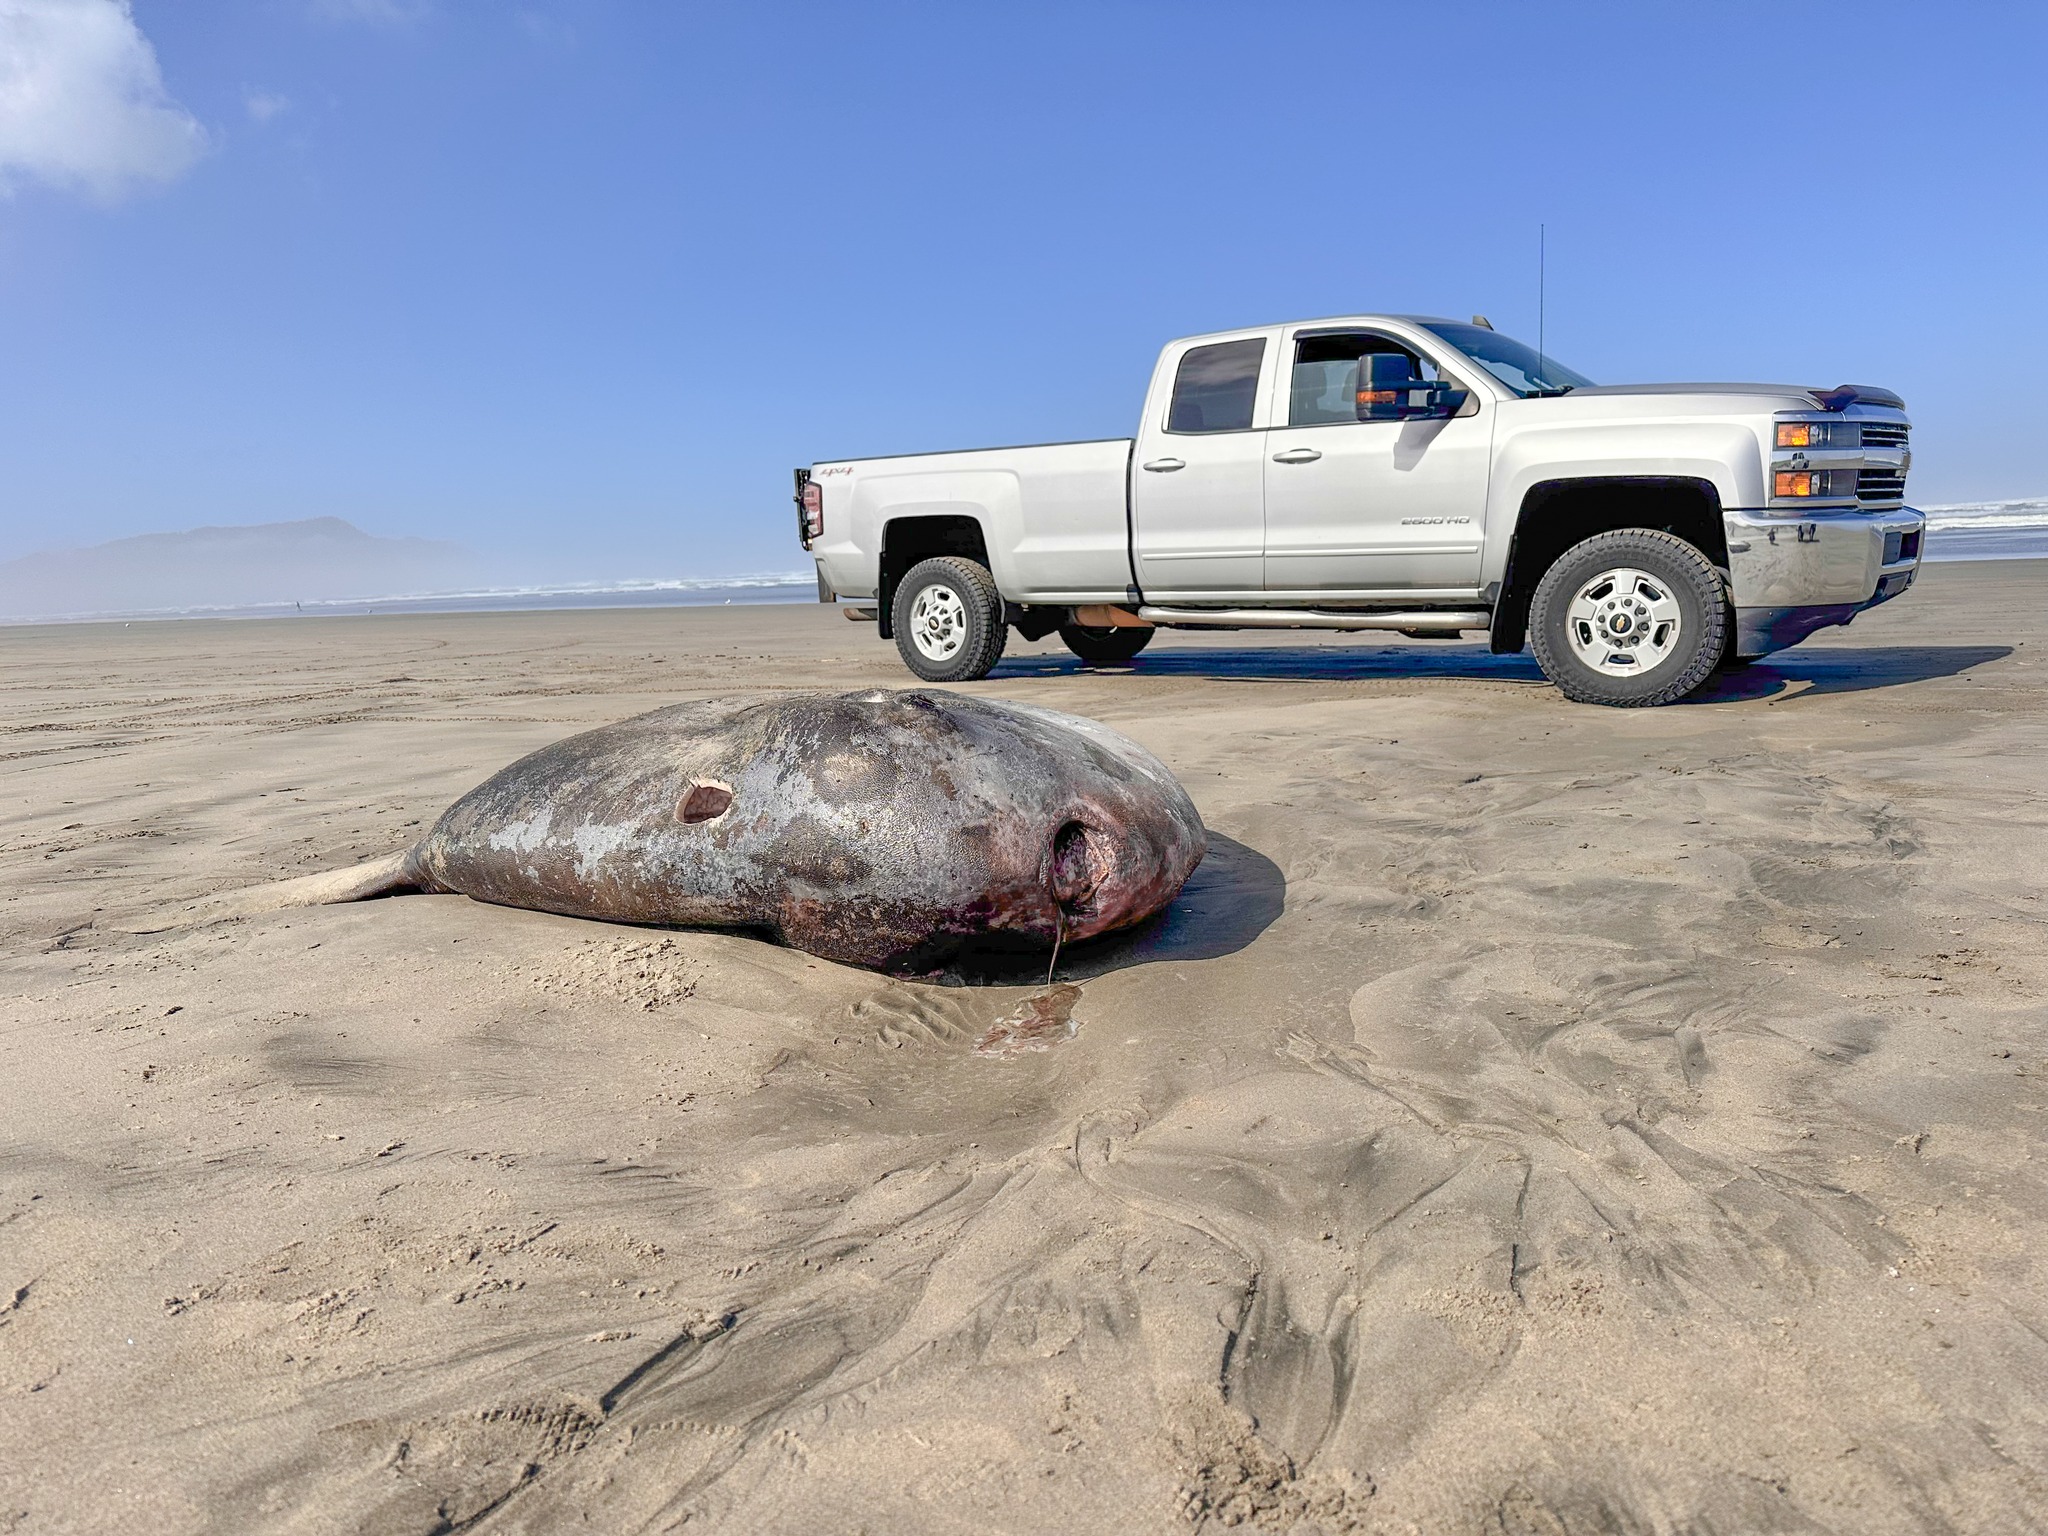 People Flock To See Massive Bizarre Fish That Washed Up On Oregon Shore